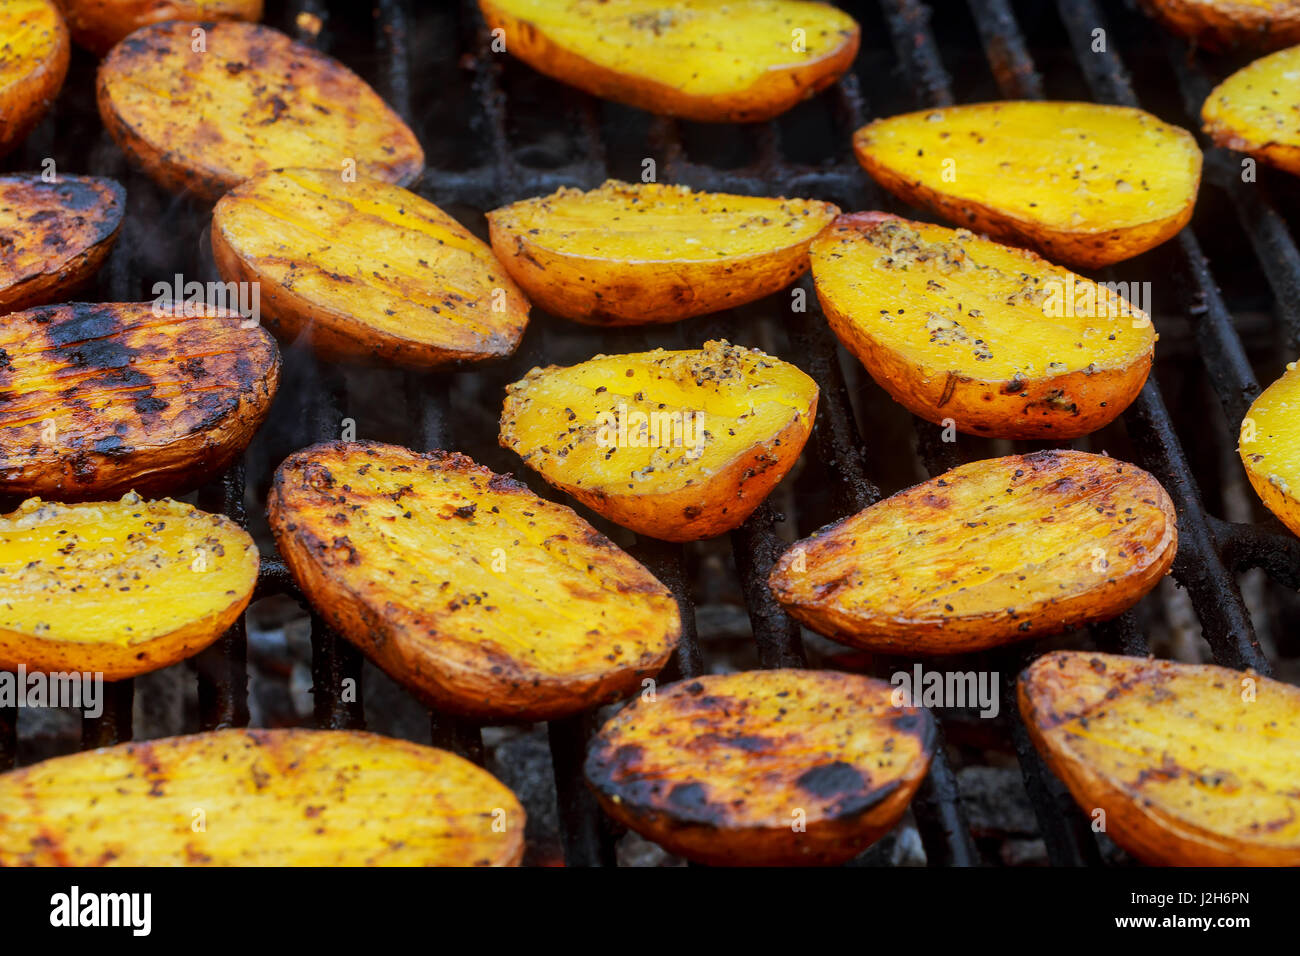 Grilling delicious potatoes on barbecue. Slice potatoes are prepared on the grill on sunny day. Close up. Culinary concept. Stock Photo